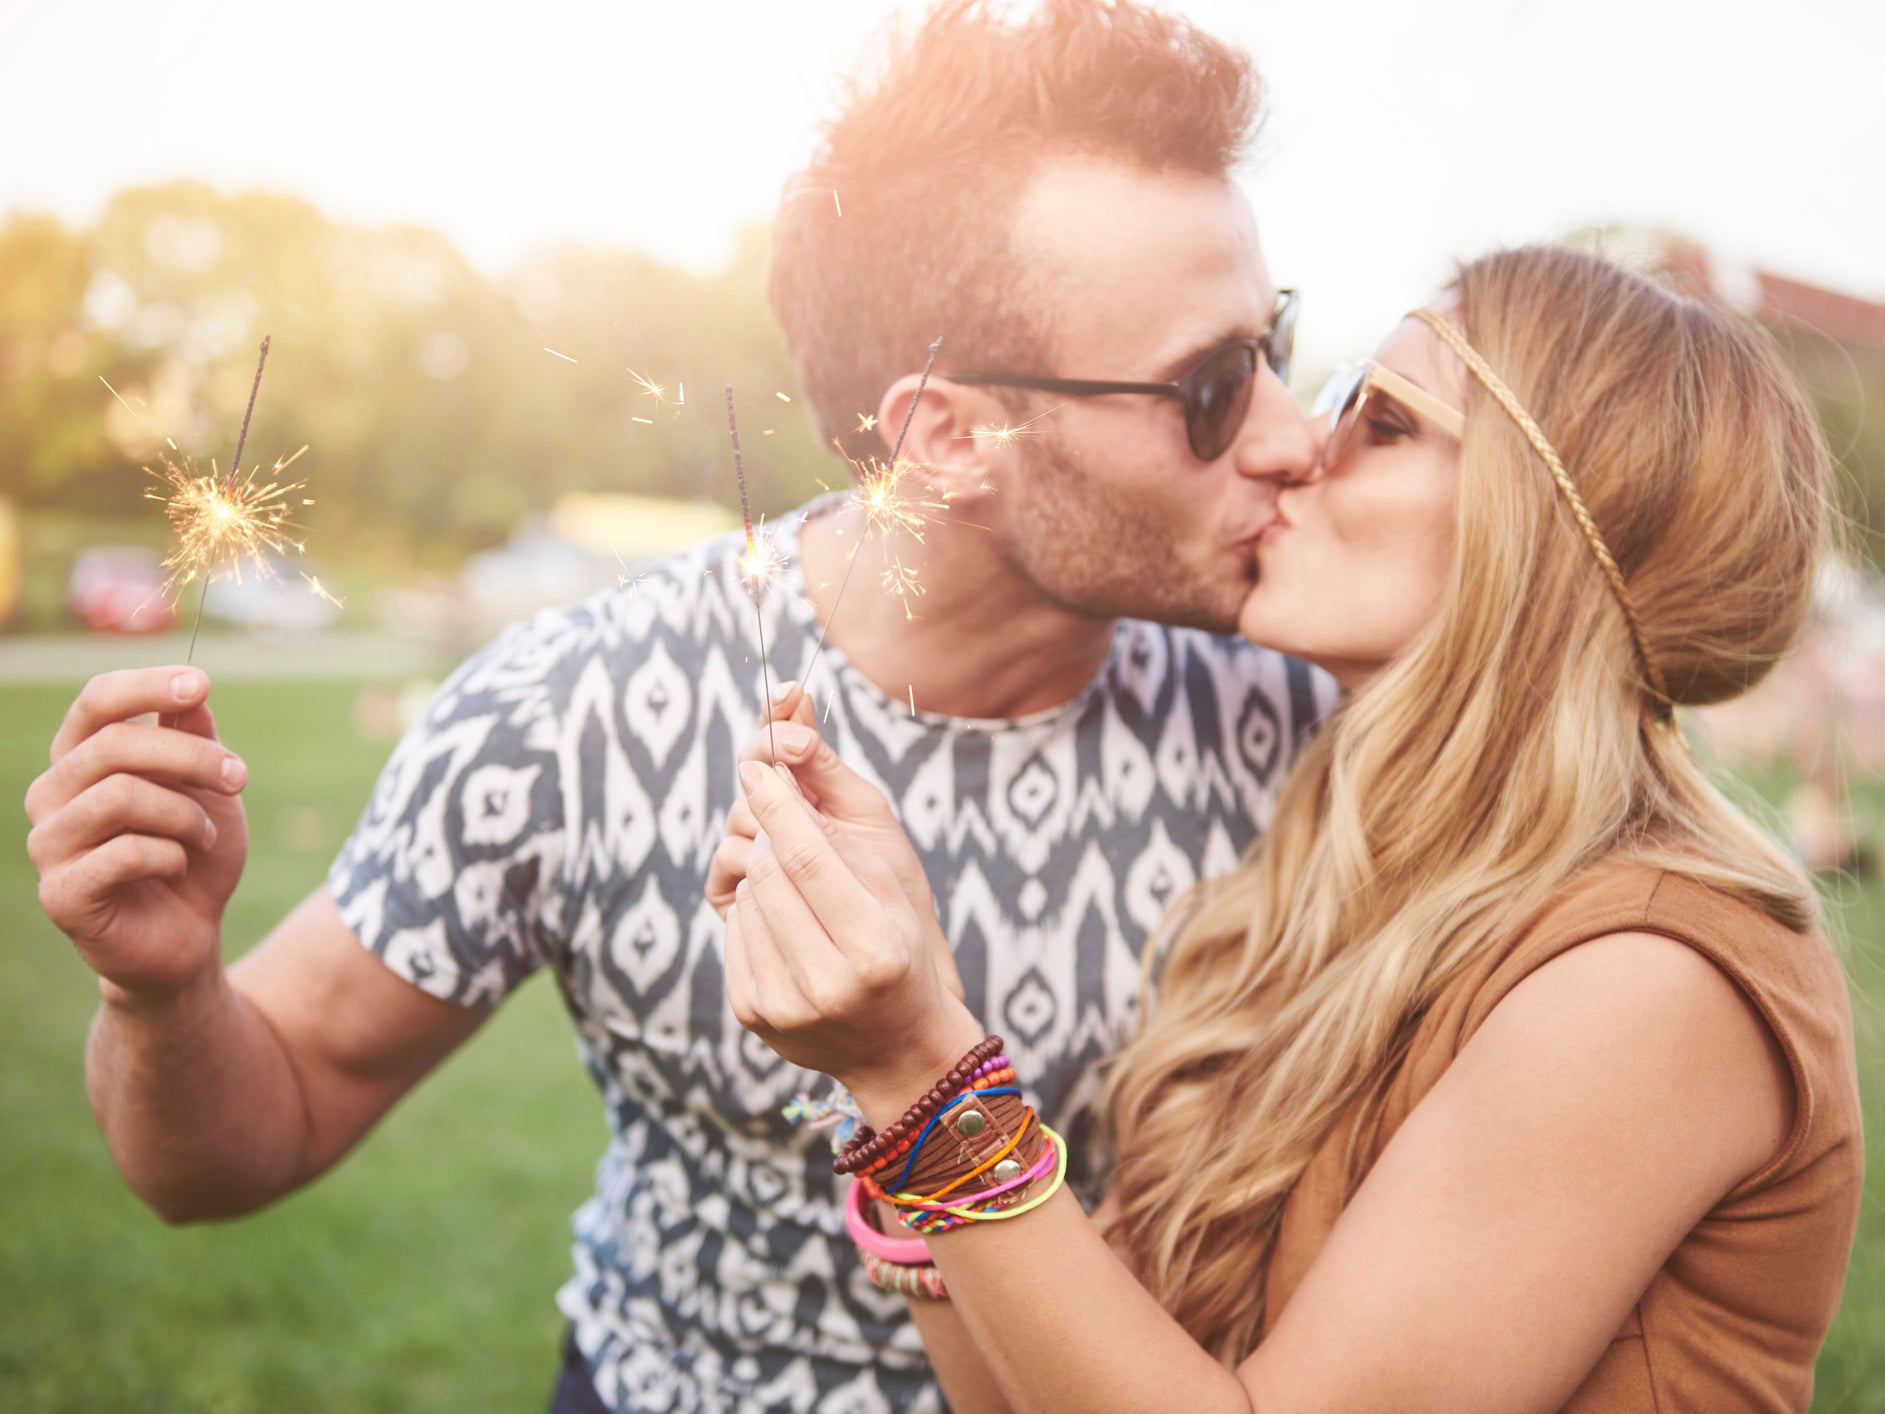 Tinder is launching a festival feature so you can find love among the mud